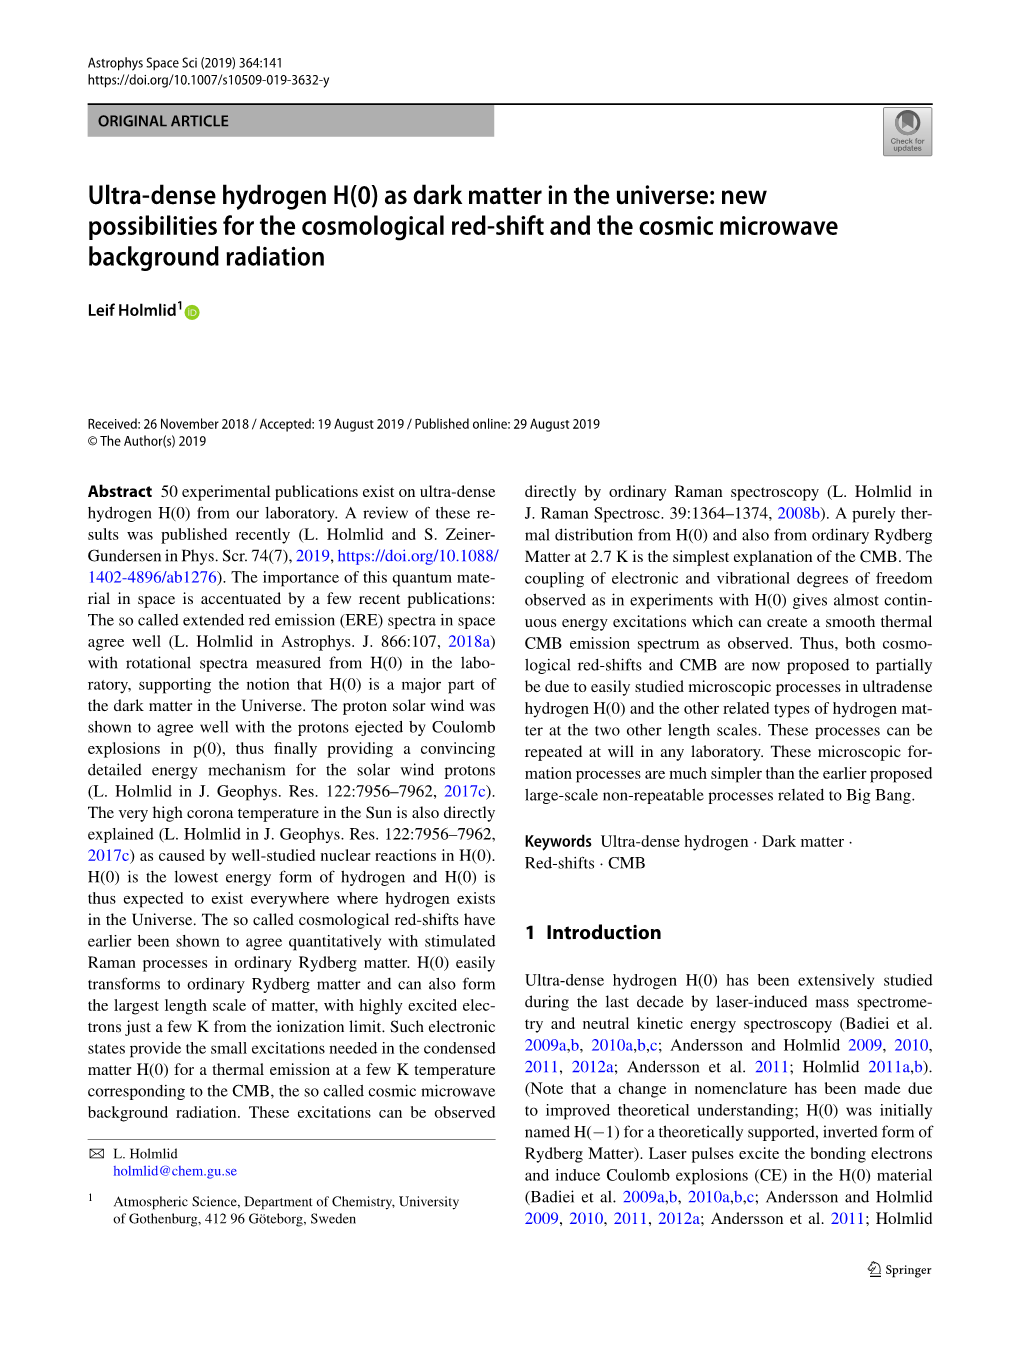 Ultra-Dense Hydrogen H(0) As Dark Matter in the Universe: New Possibilities for the Cosmological Red-Shift and the Cosmic Microwave Background Radiation